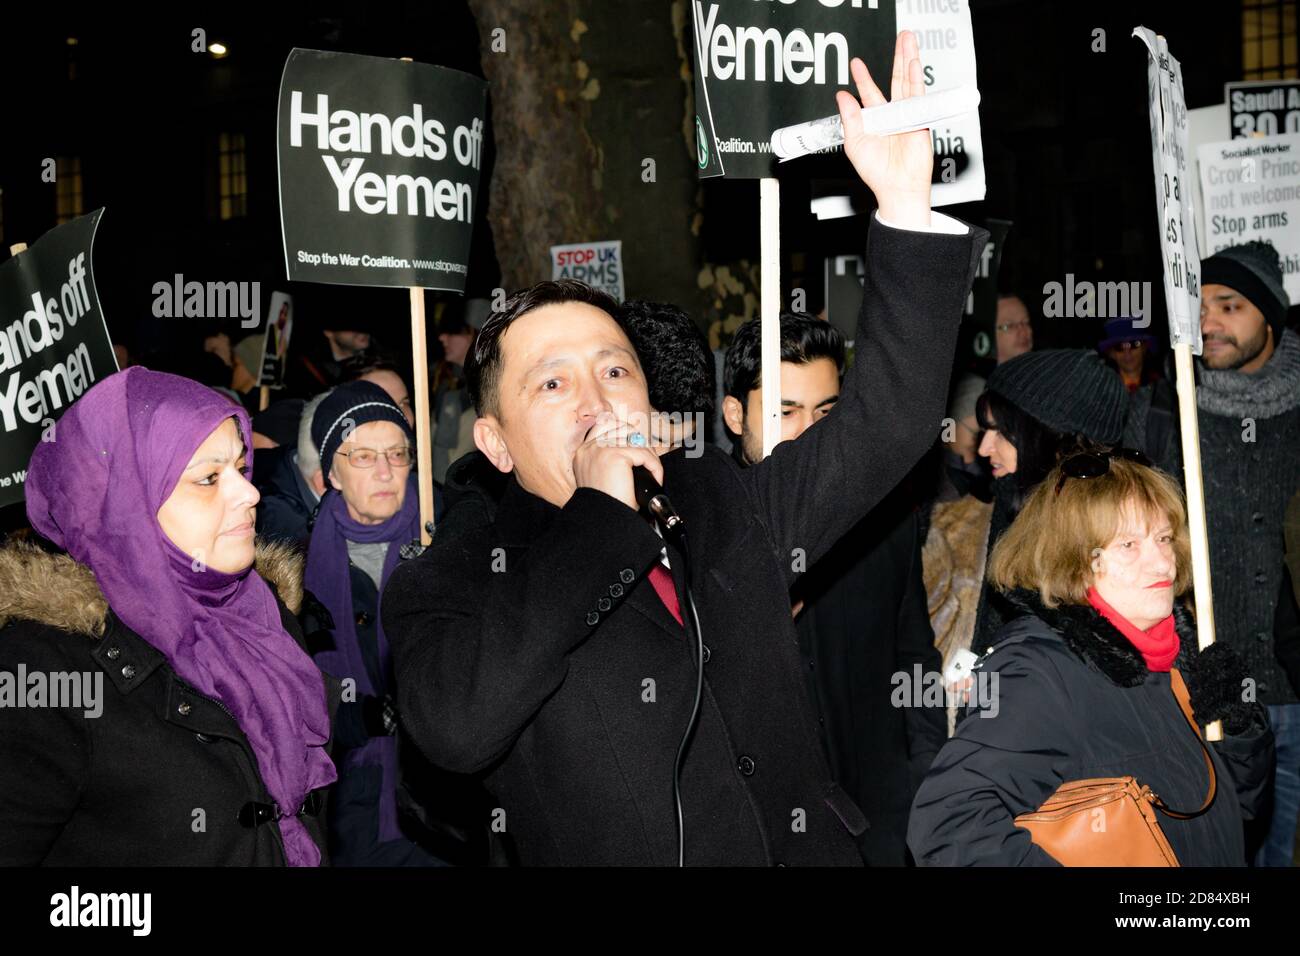 Downing Street, London, United Kingdom, 07th March 2018:- Unknown Protester addresses the crowd outside Downing Street against the visit to the UK by Stock Photo